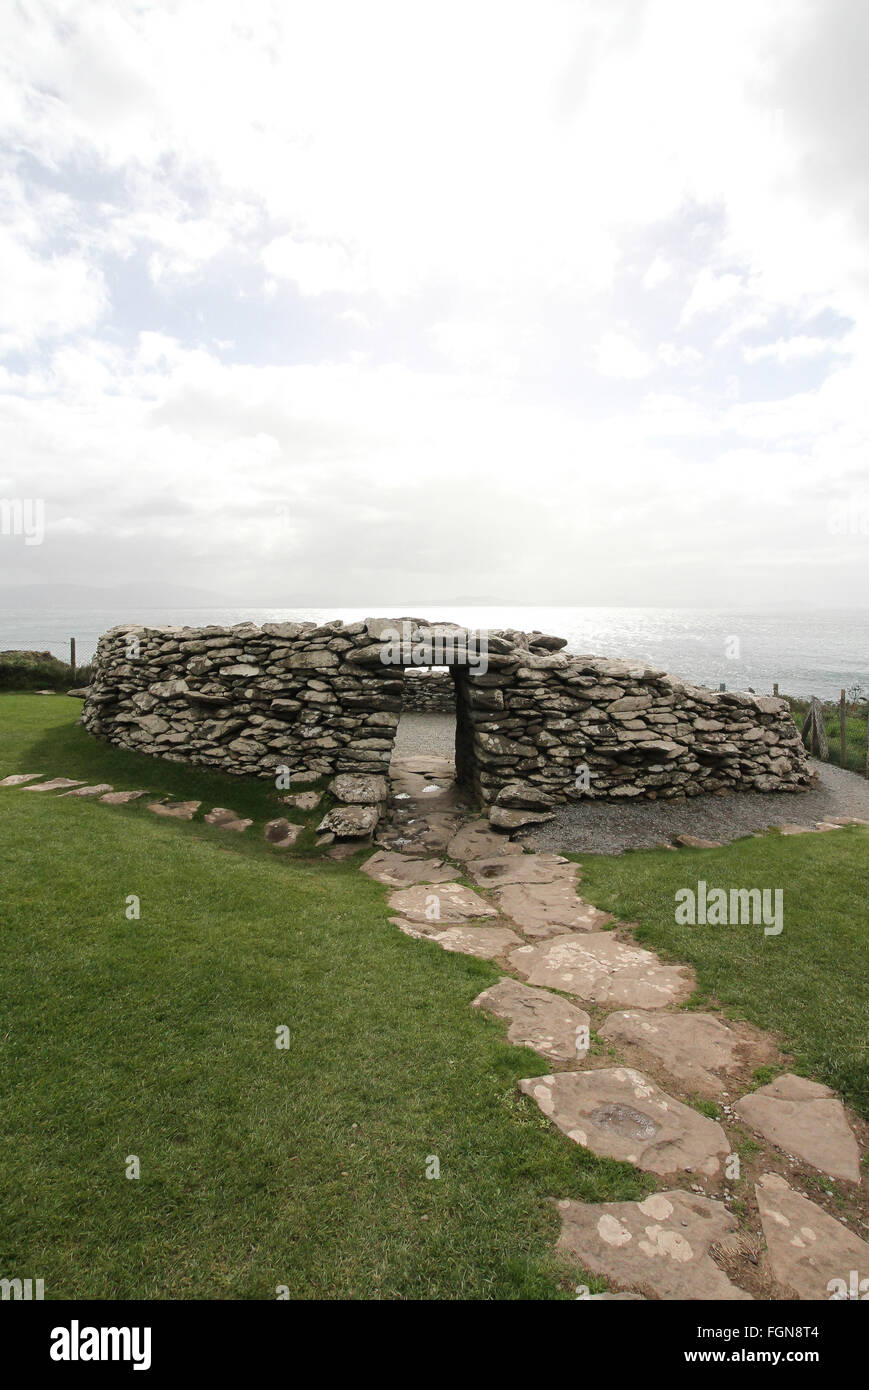 Dunbeg Fort, an Iron-age promontory fort on the Slea Head Drive, Dingle Peninsula, County Kerry, Ireland. Stock Photo